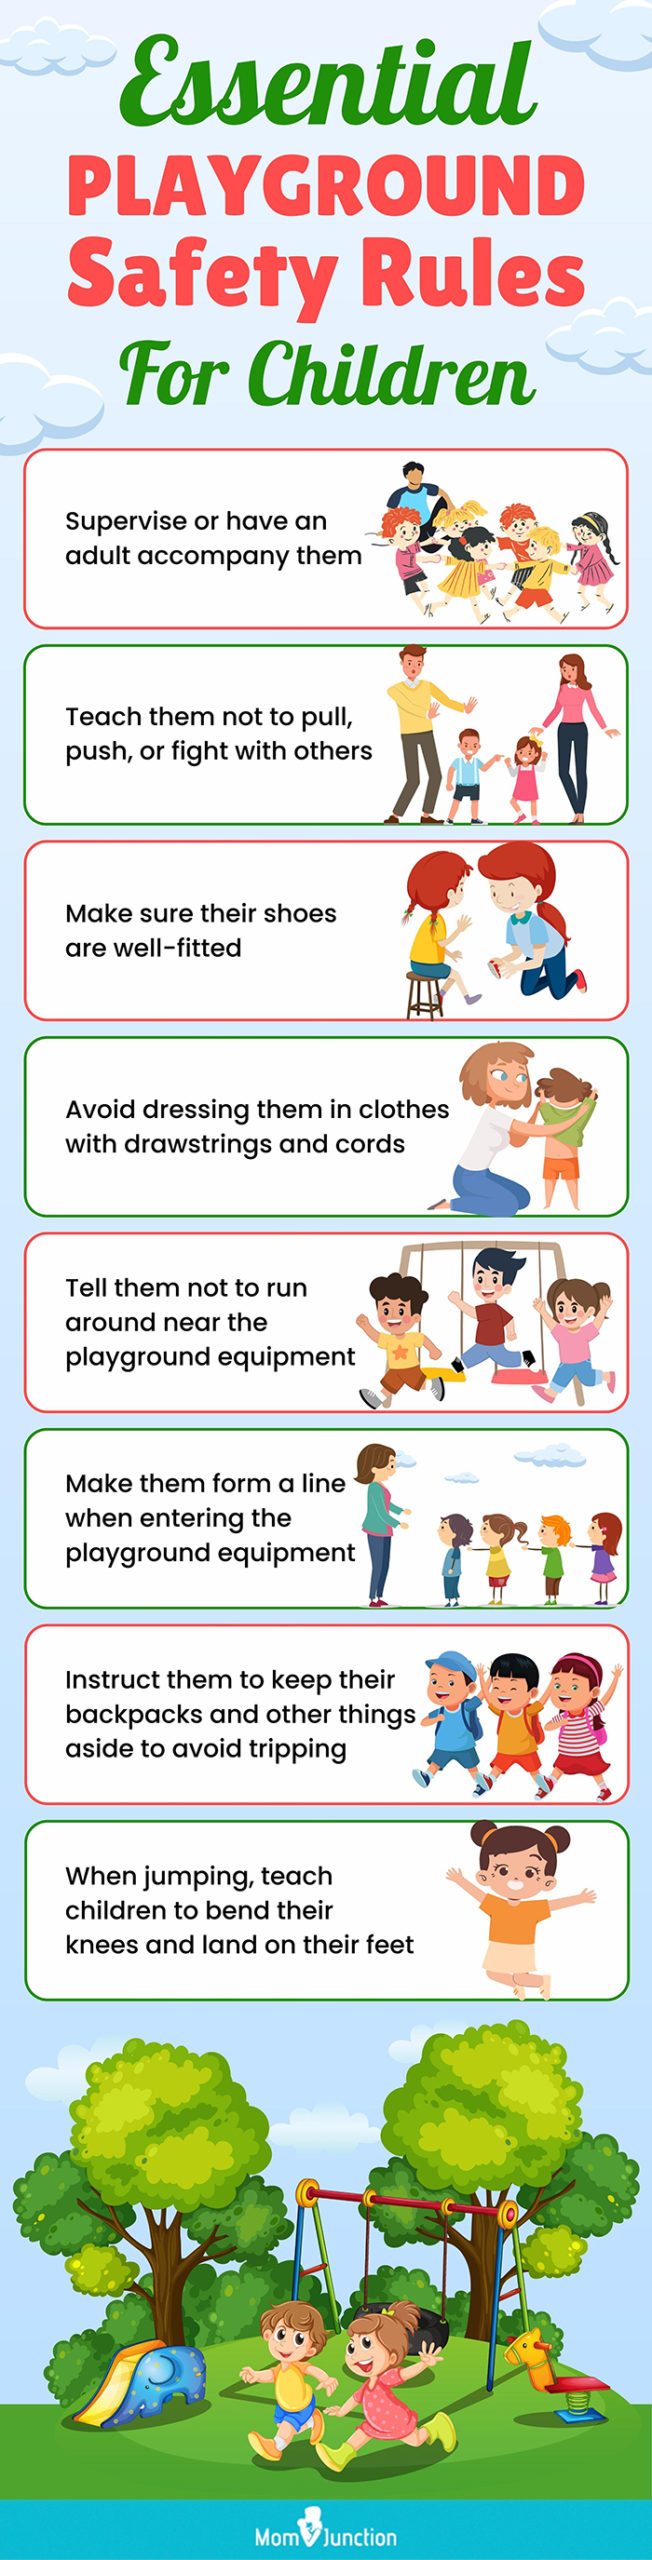 essential playground safety rules for children (infographic)